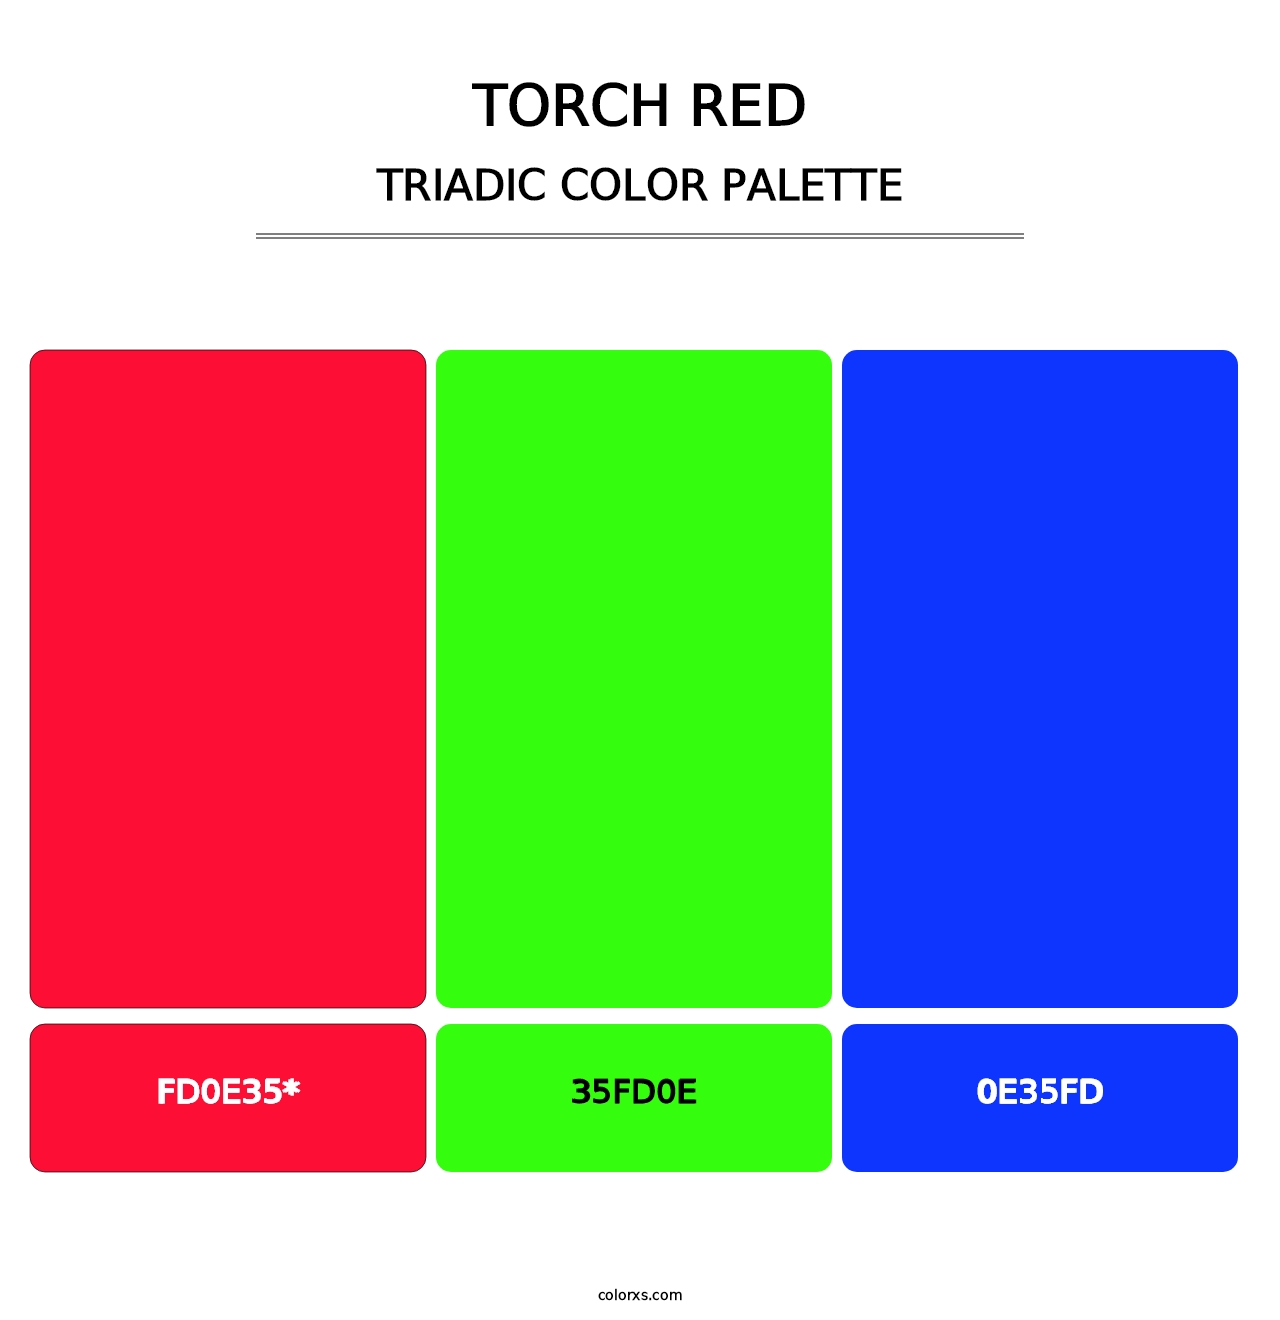 Torch Red - Triadic Color Palette